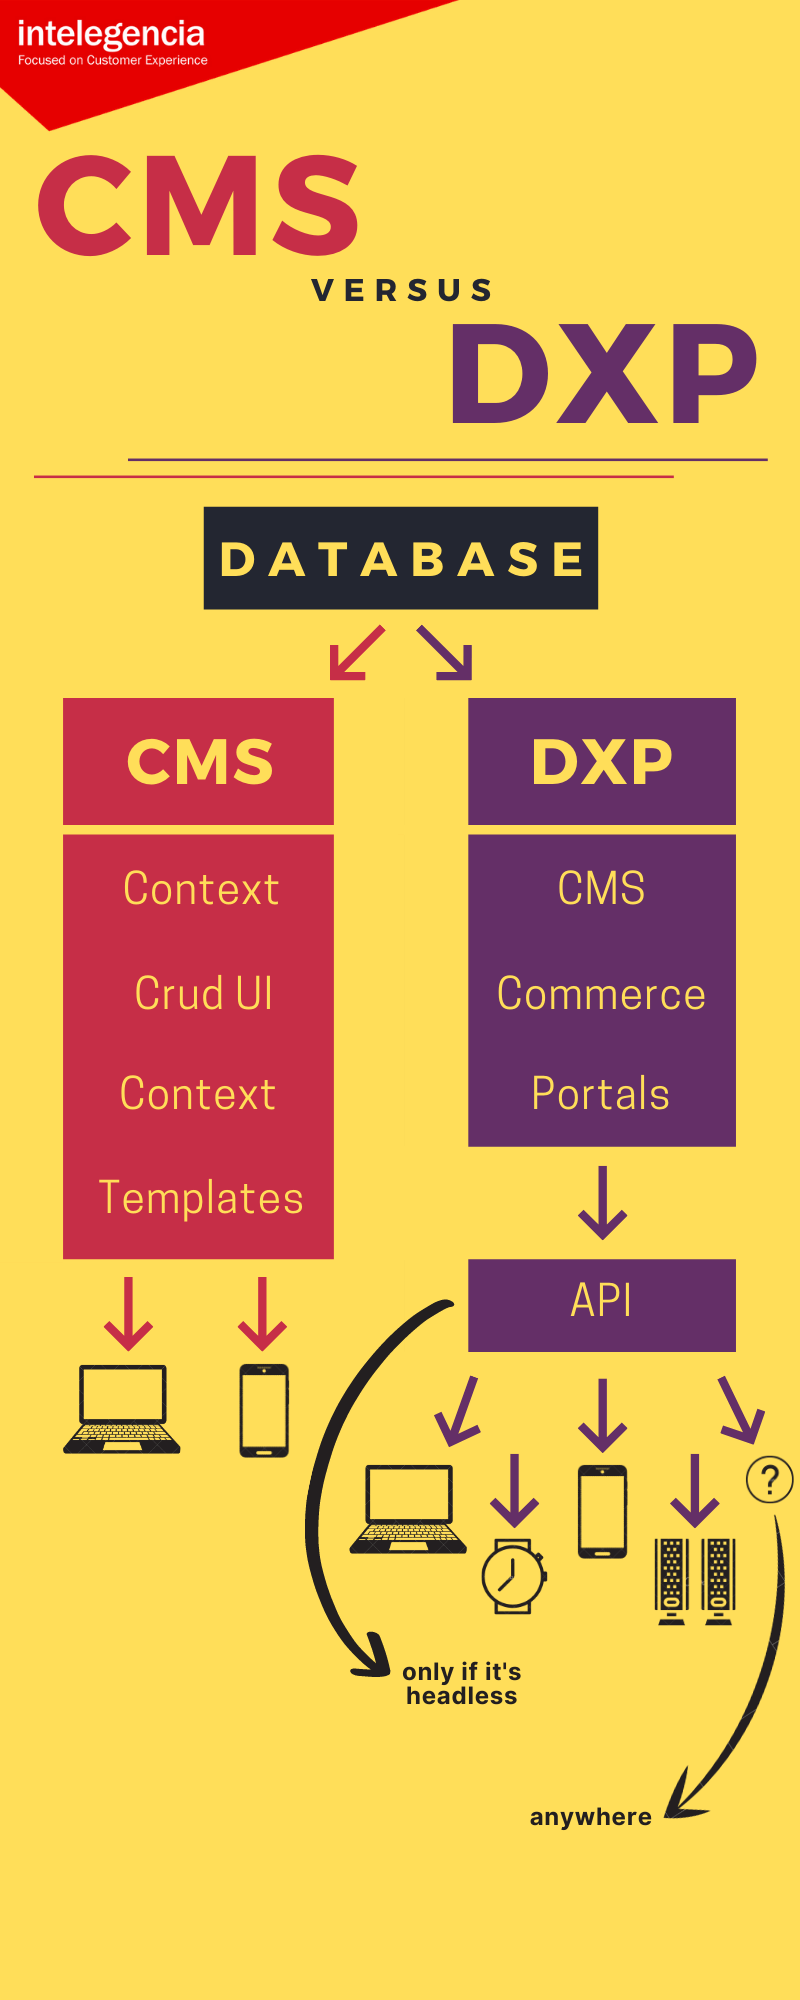 The differences between CMS and DXP platforms.